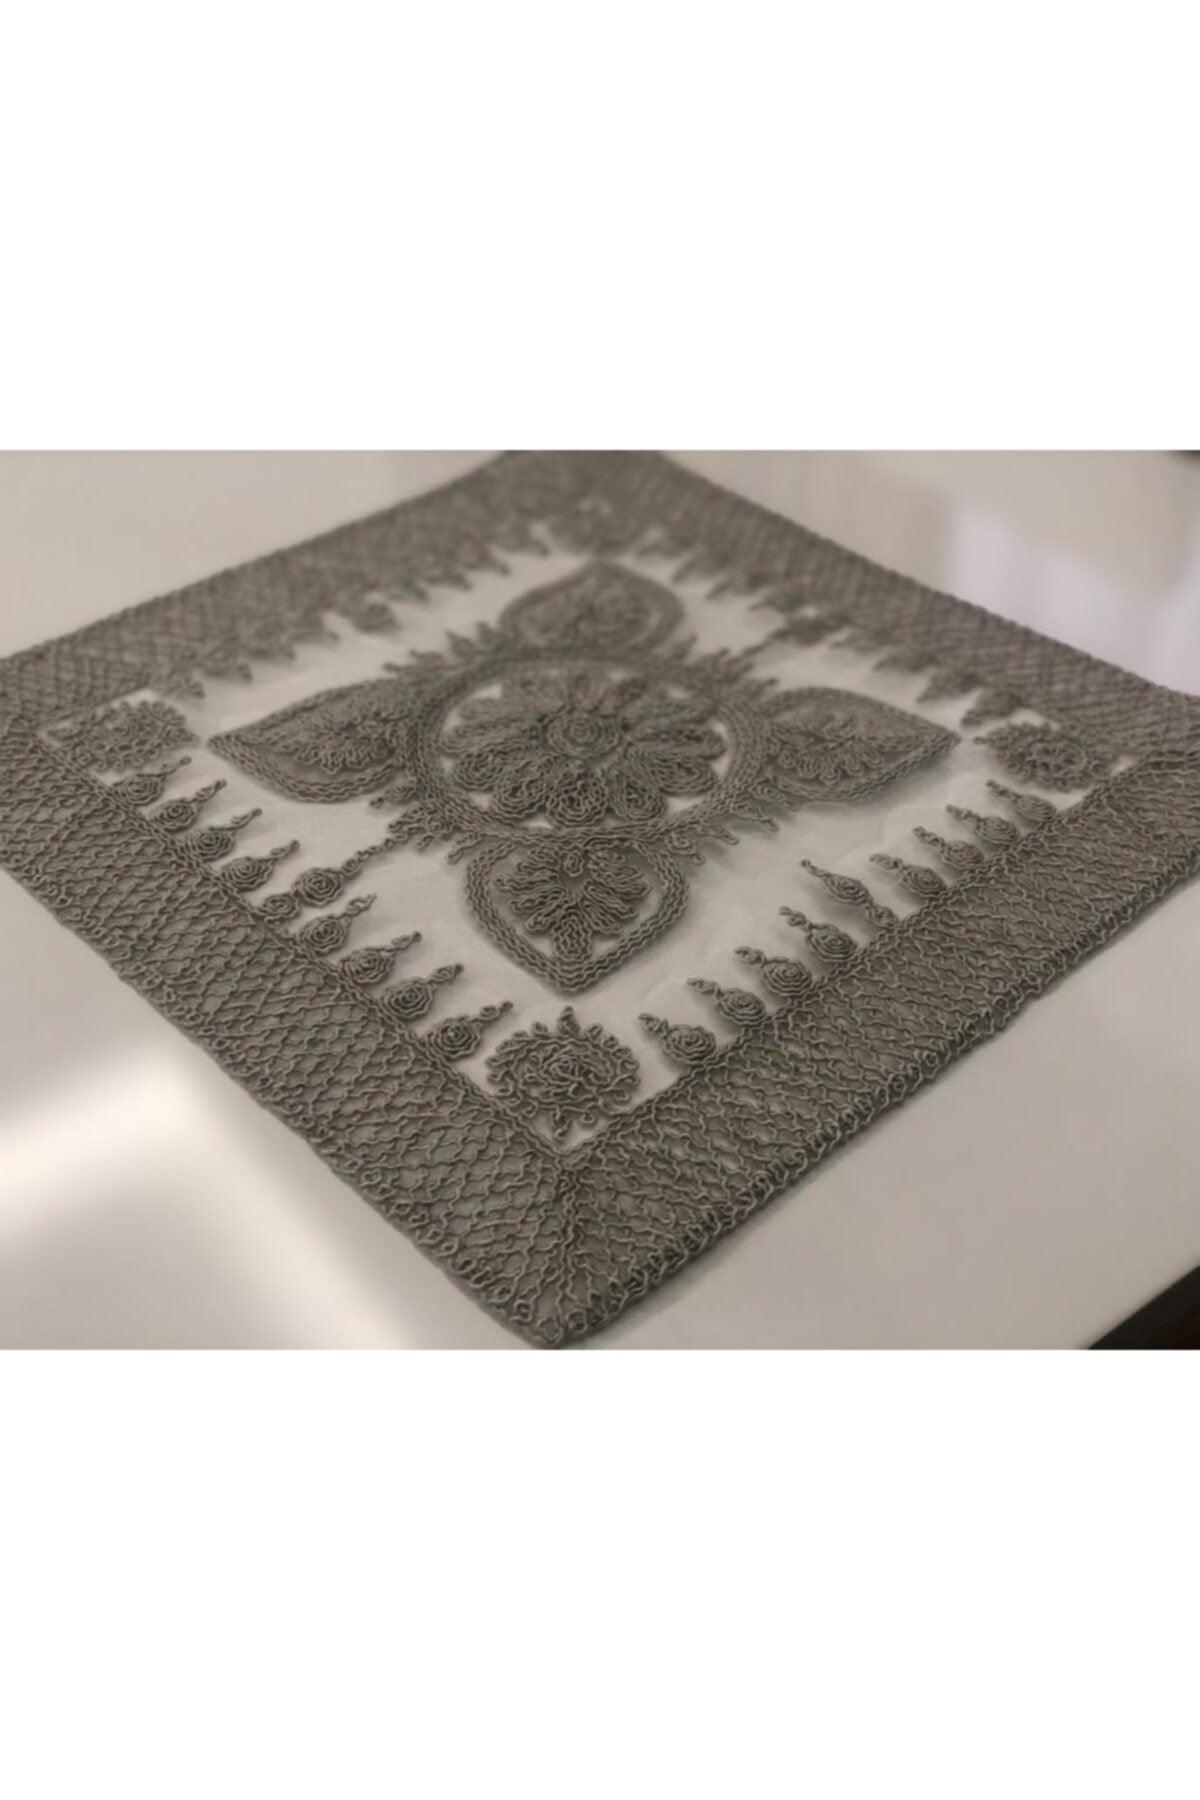 Square Pattern Anglez Cord Embroidered 6 Person Supla Placemat - Swordslife